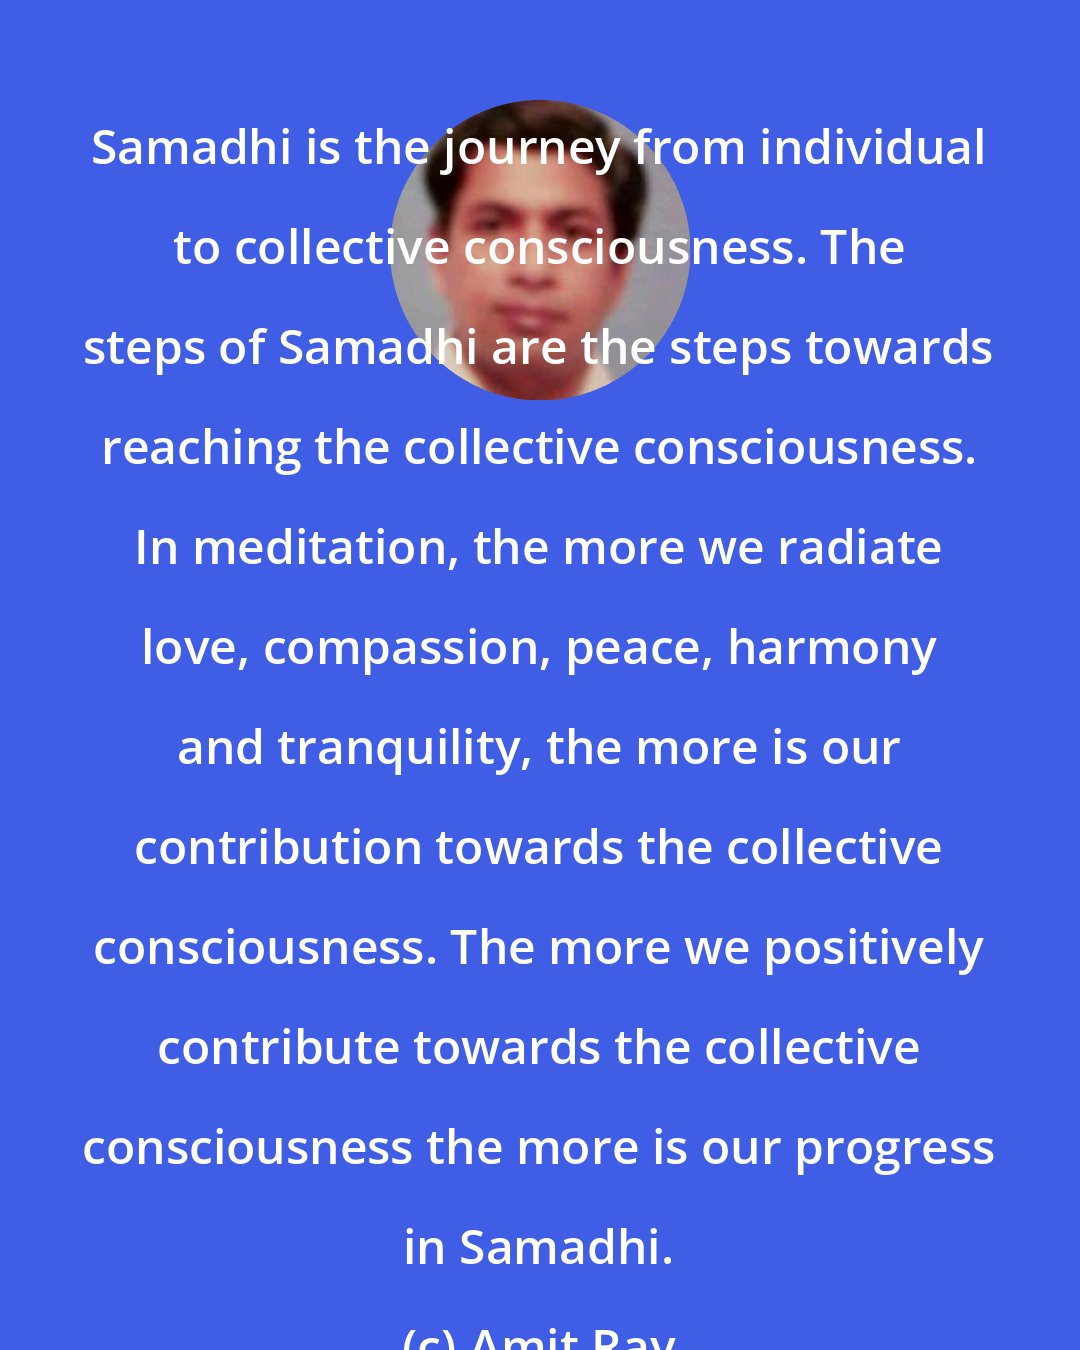 Amit Ray: Samadhi is the journey from individual to collective consciousness. The steps of Samadhi are the steps towards reaching the collective consciousness. In meditation, the more we radiate love, compassion, peace, harmony and tranquility, the more is our contribution towards the collective consciousness. The more we positively contribute towards the collective consciousness the more is our progress in Samadhi.